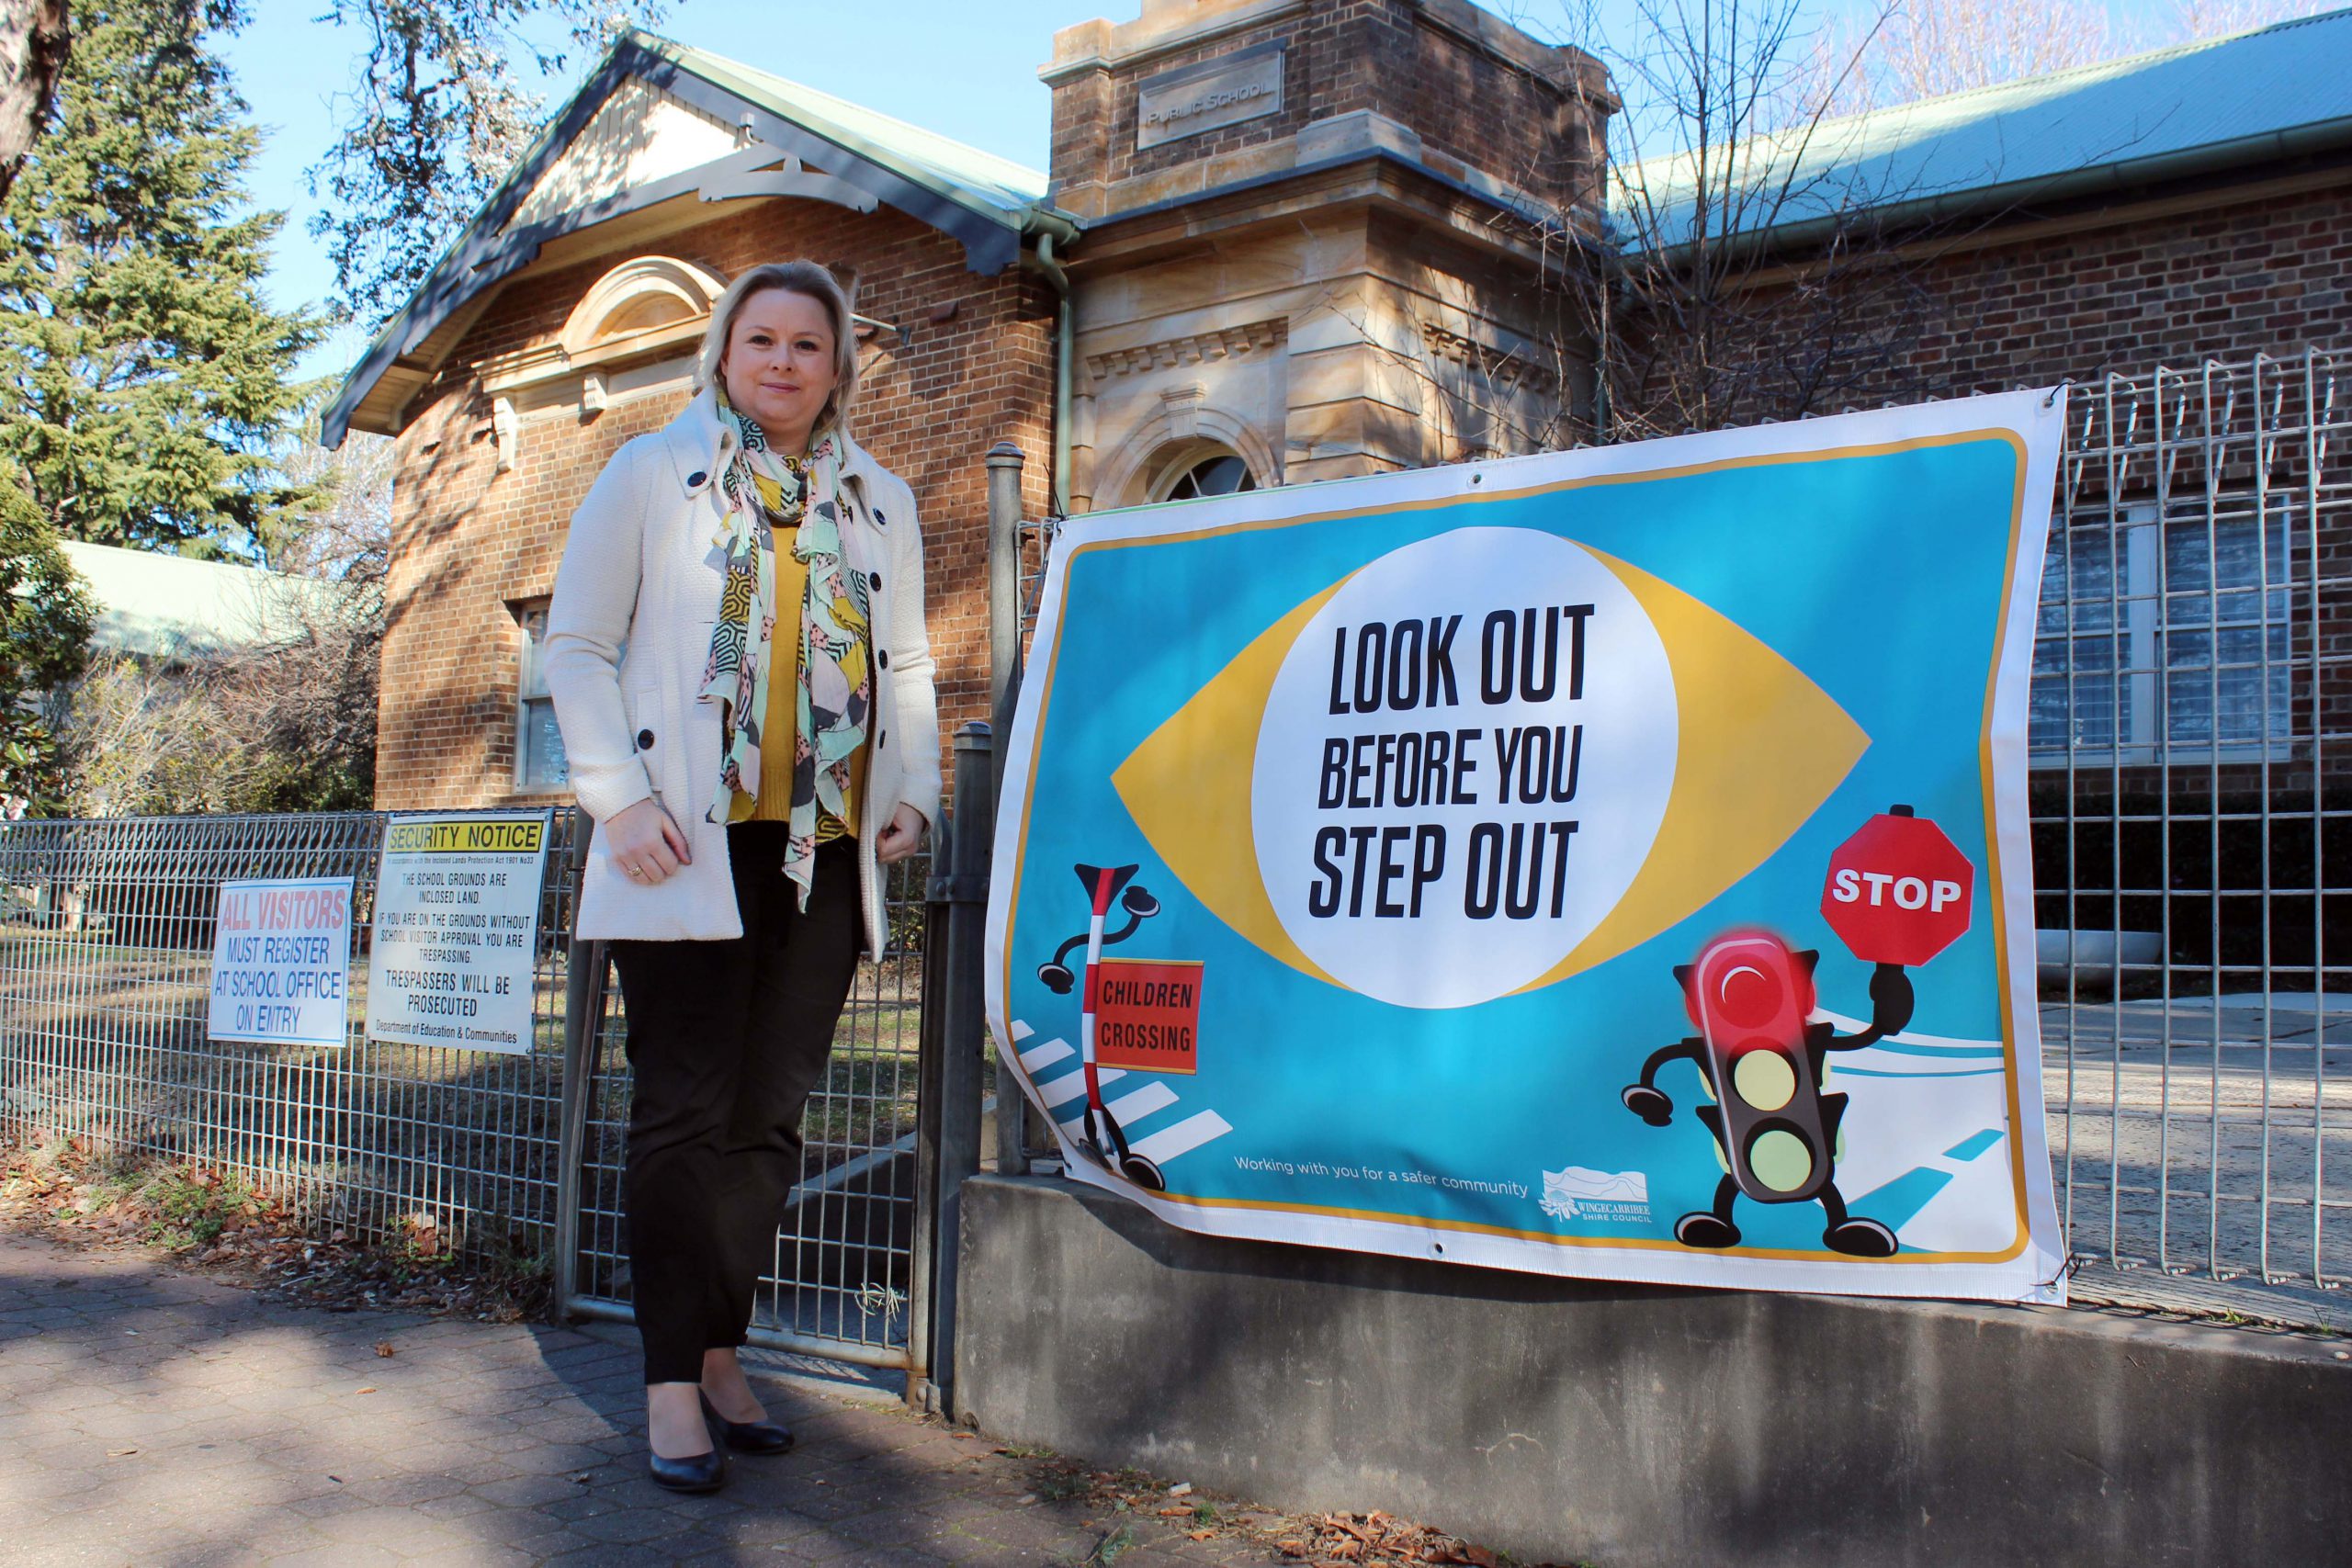 Road Safety Officer, Melanie Lausz, with the custom ‘Look out before you step out’ banner at Bowral Public School